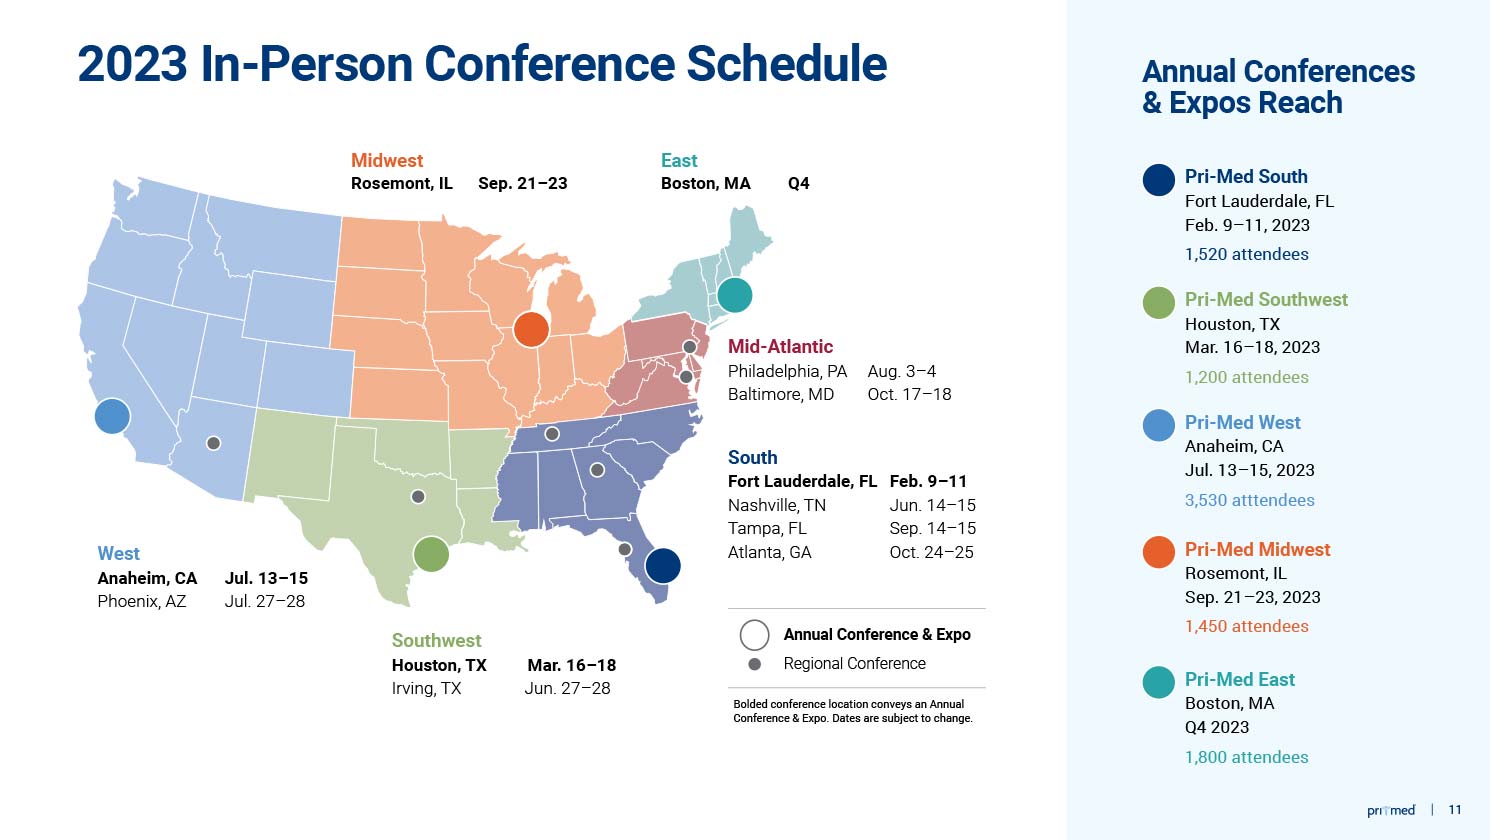 Sample Pri-Med Powerpoint presentation design with title "2023 In-Person Conference Schedule"